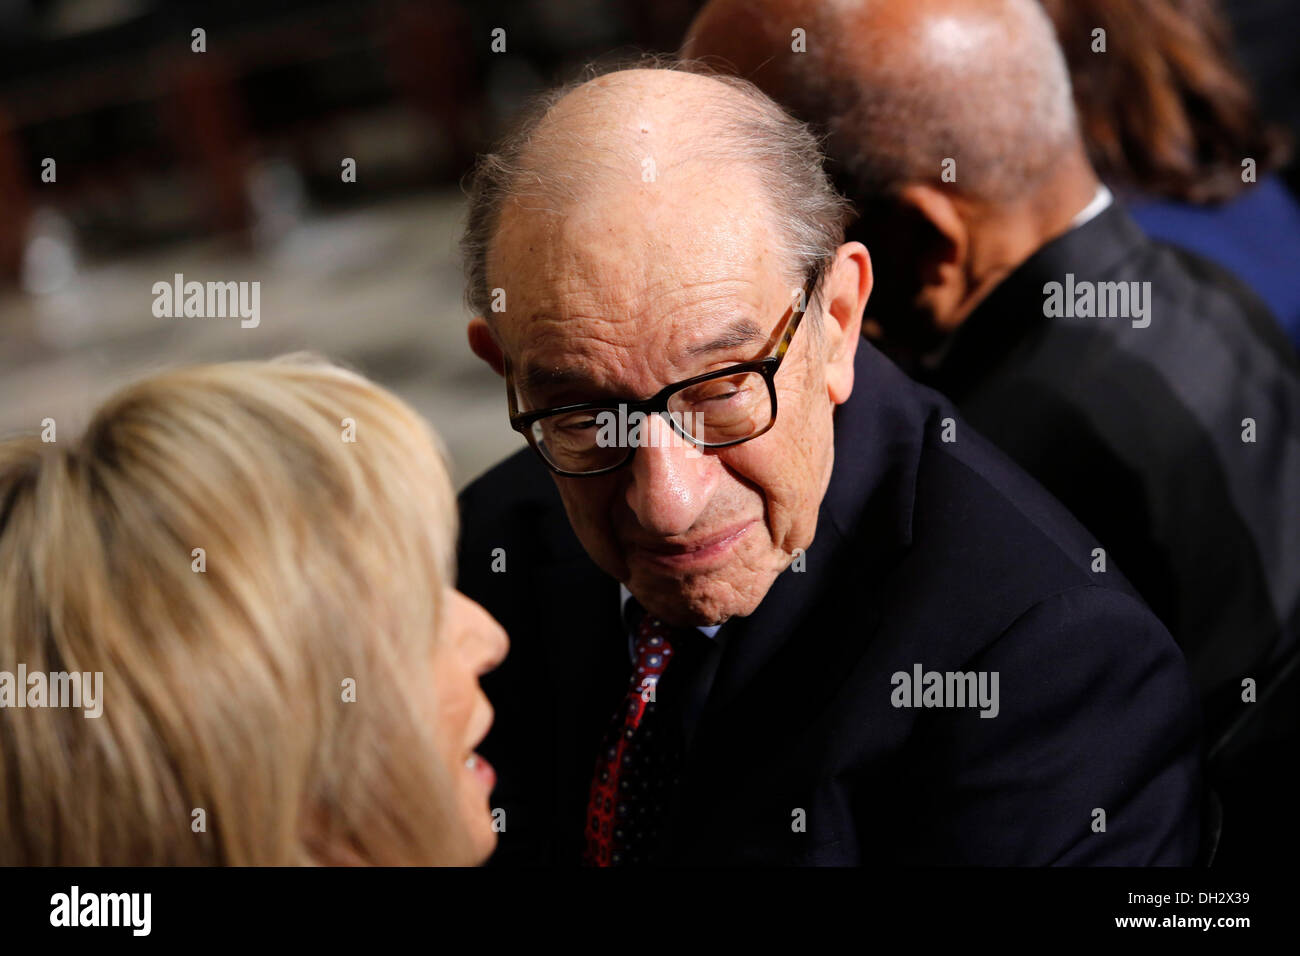 Former United States Federal Reserve Chairman Alan Greenspan attends a memorial service honoring former Speaker of the U.S. House Thomas S. Foley (Democrat of Washington) in the U.S. Capitol in Washington, DC on October 29, 2013. Foley represented Washington's 5th Congressional District was the 57th Speaker of the US House of Representatives from 1989 to 1995. He later served as US Ambassador to Japan from 1997 to 2001. Credit: Aude Guerrucci / Pool via CNP Stock Photo